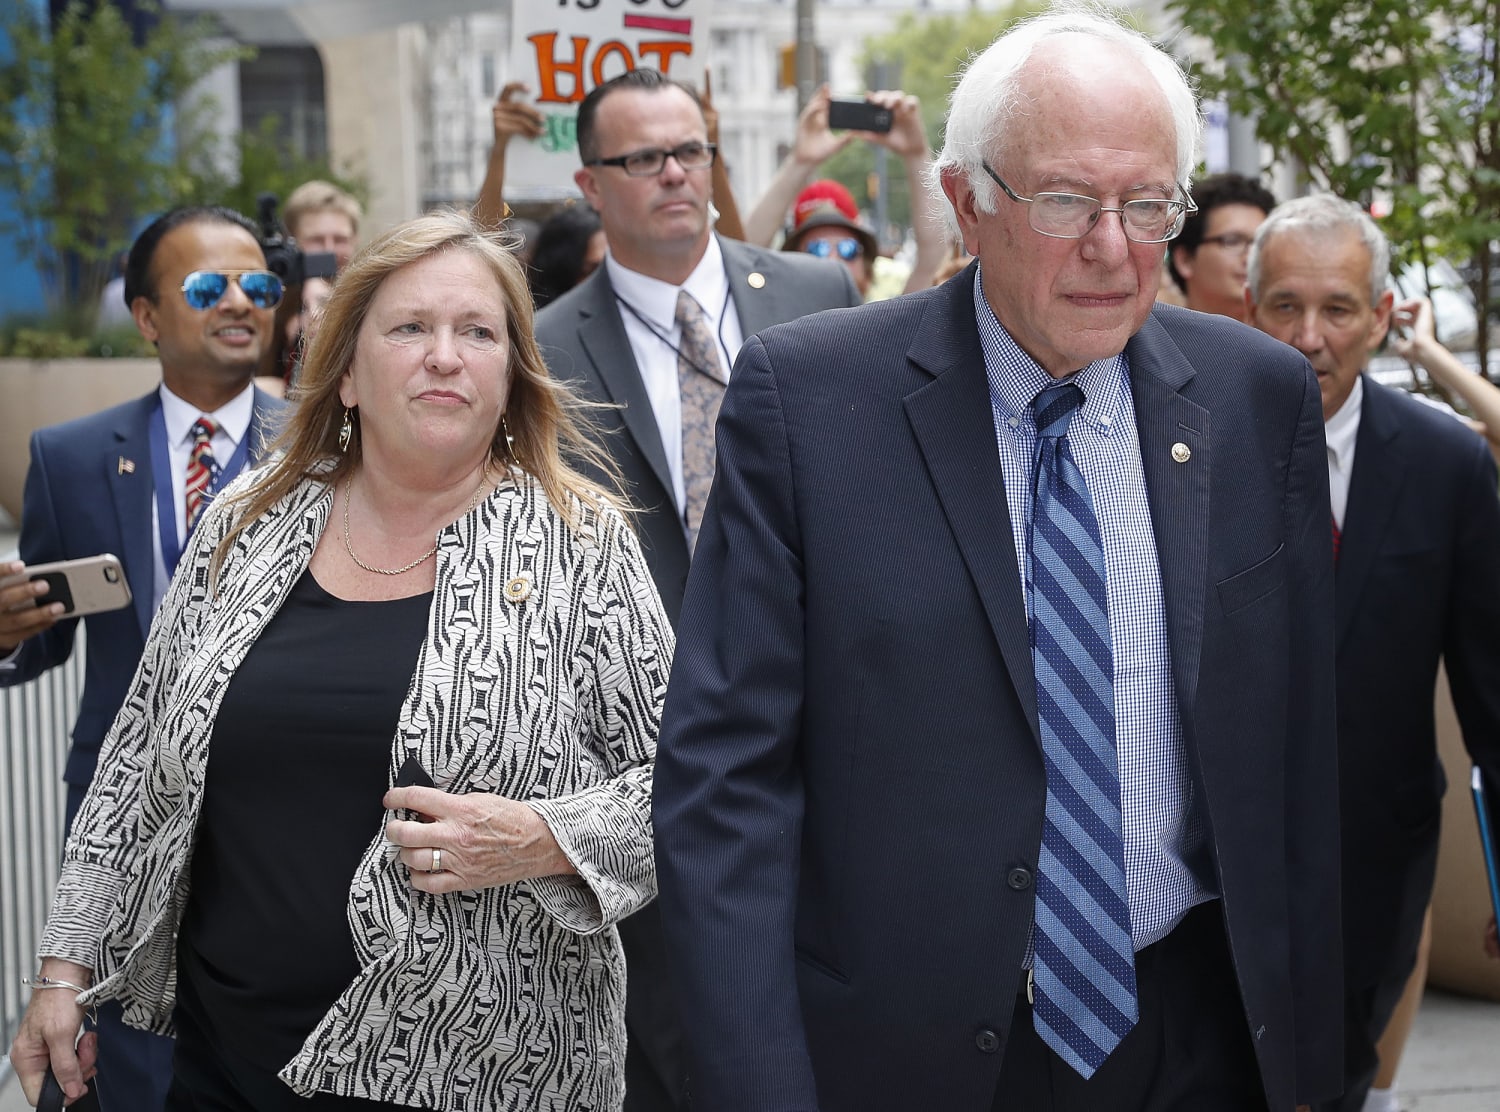 Feds decline to bring charges against Bernie Sanders wife in land deal image